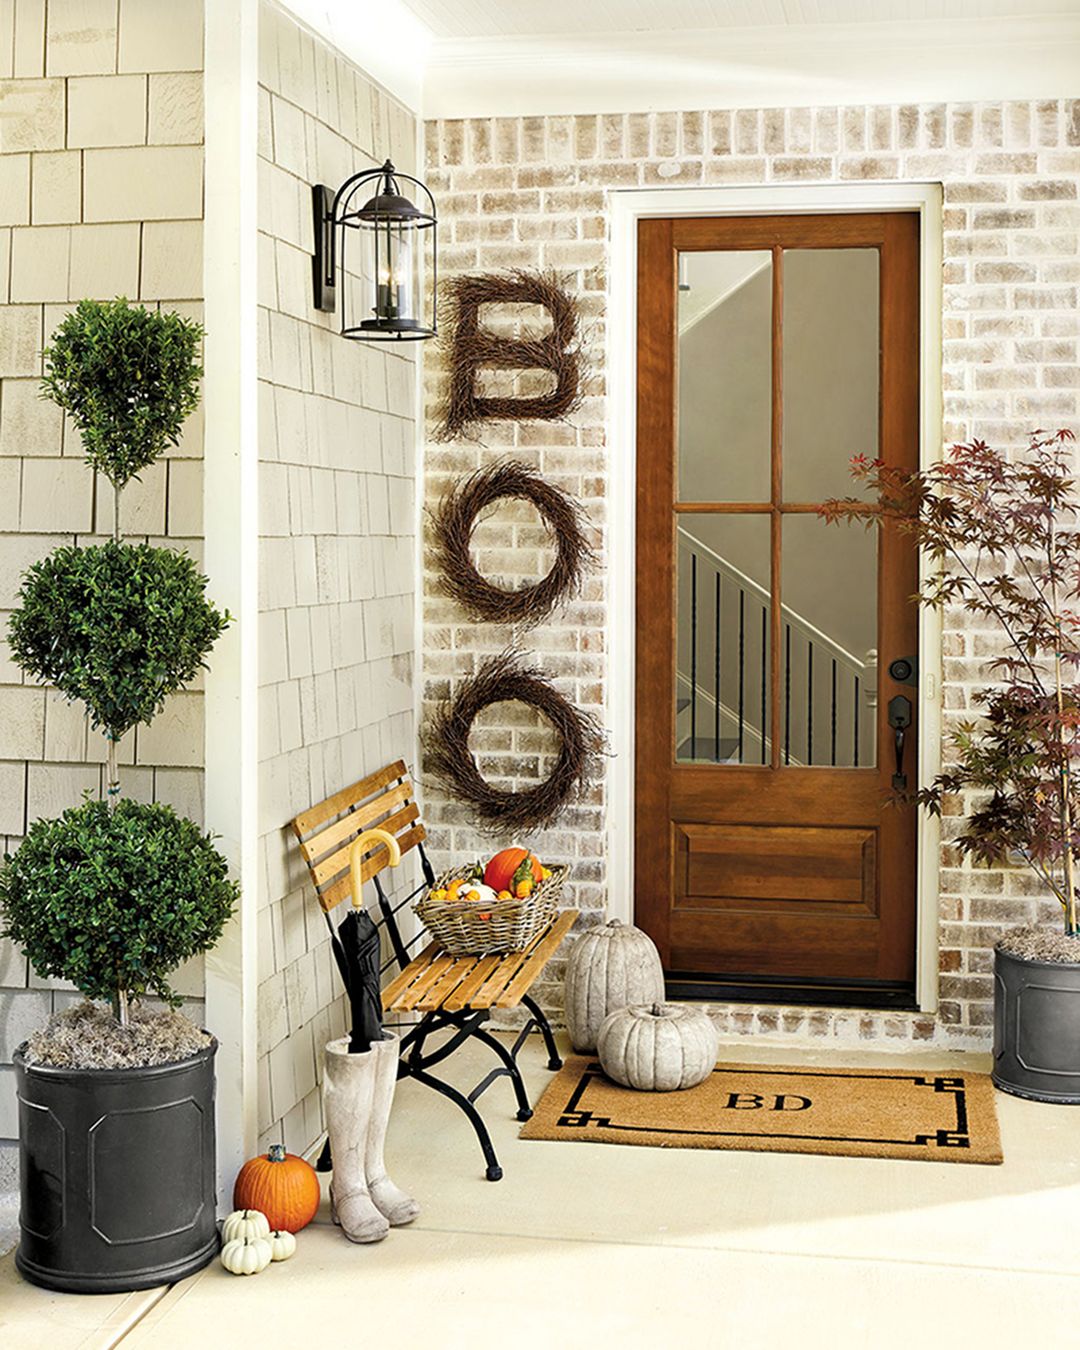 Decorating Your Outdoor Space For Fall From Padding Top Info